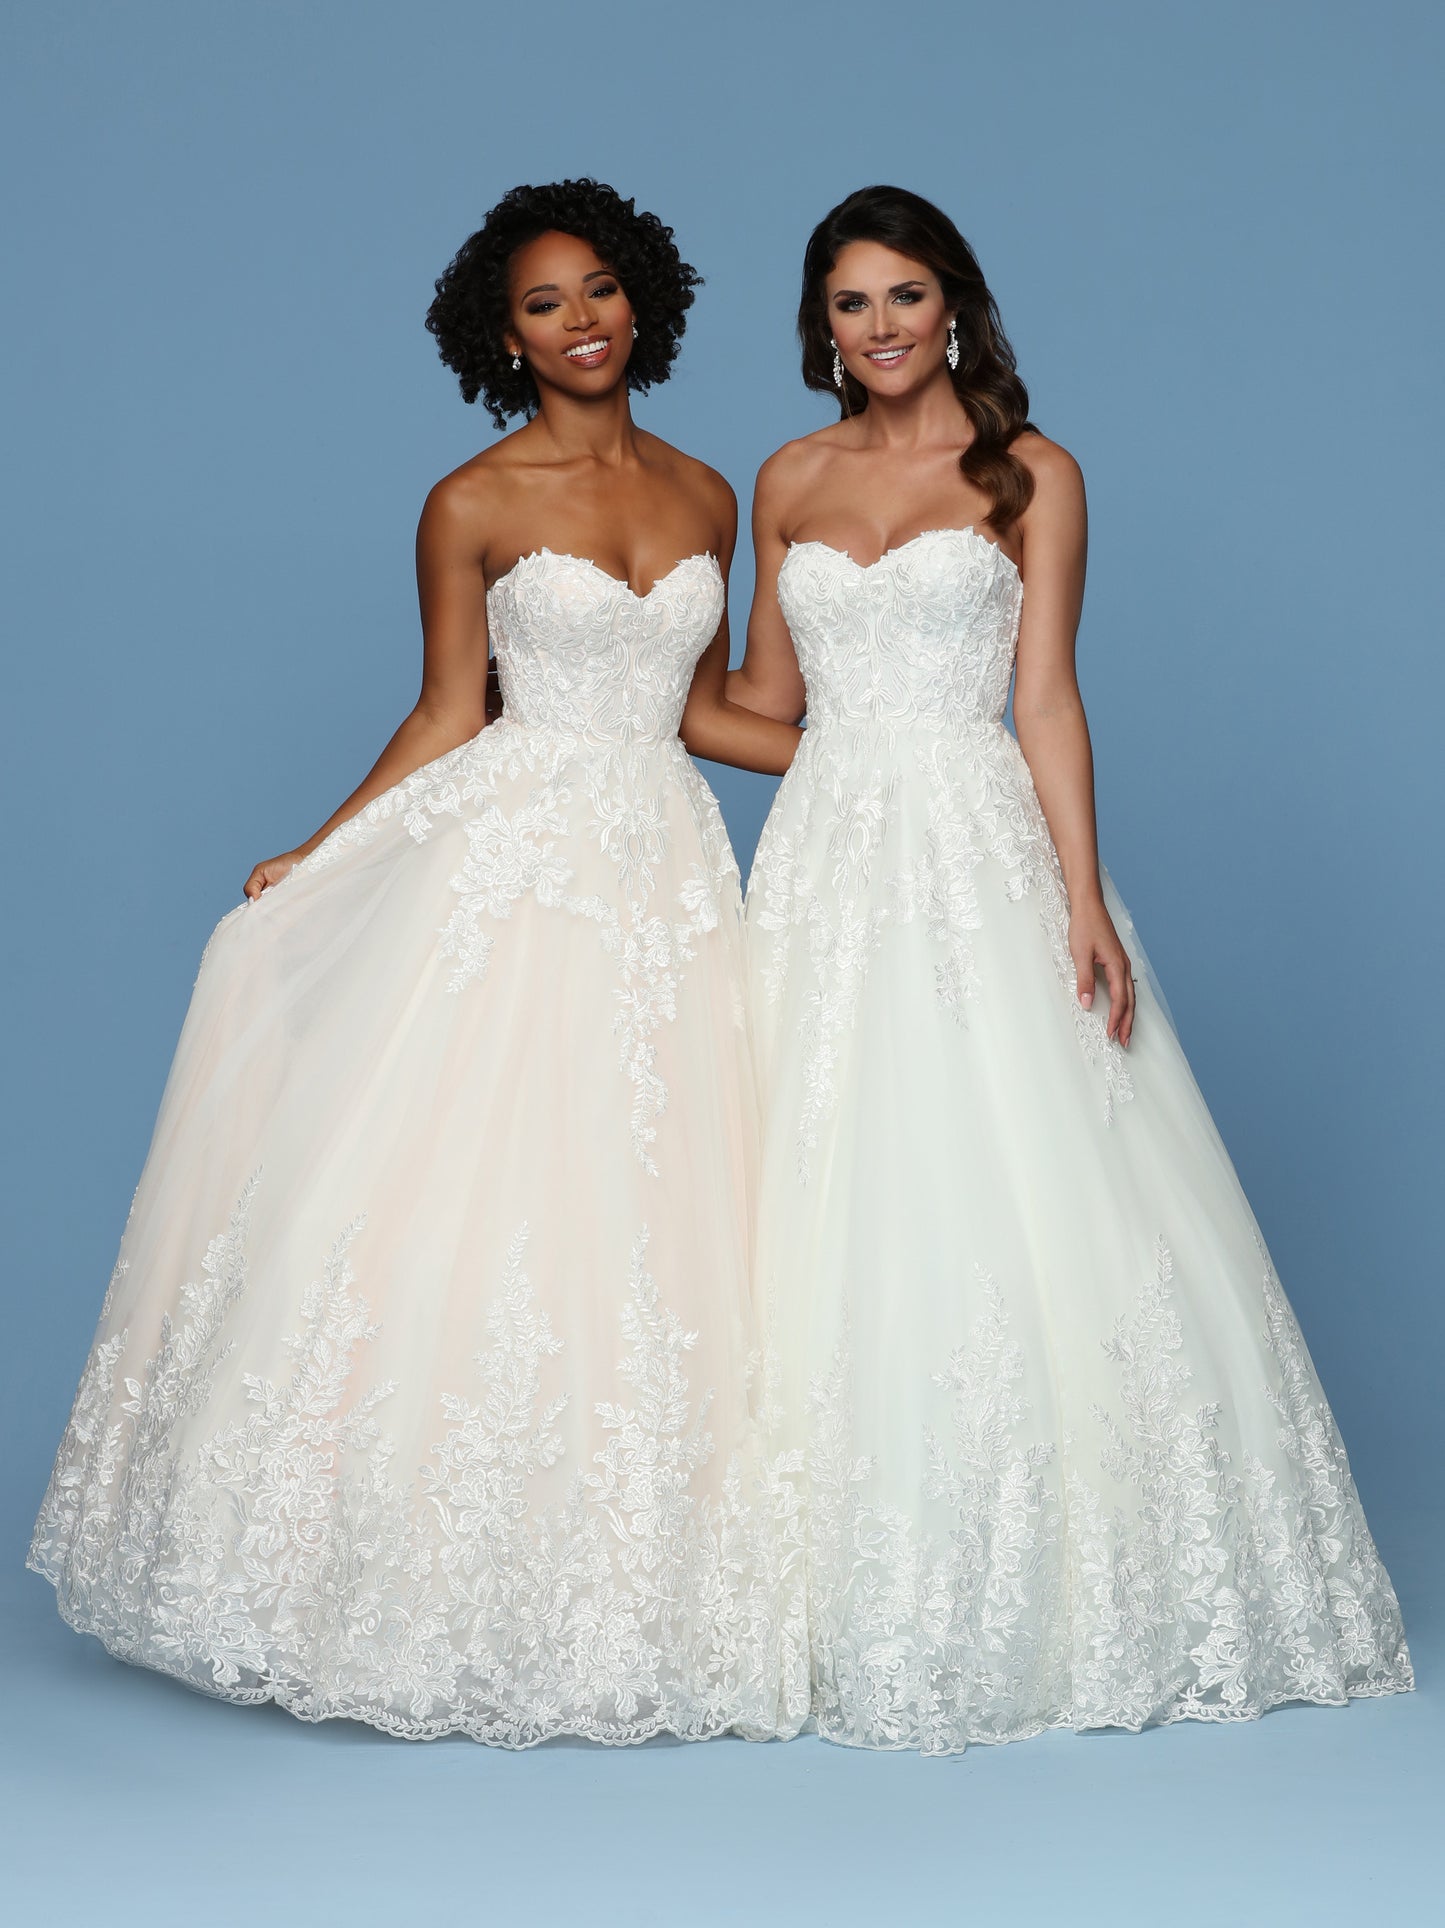 Davinci Bridal 50560 has a fitted strapless Sweetheart neckline with an embroidered lace bodice cascading into the tulle skirt. Full A Line Skirt Features a Lush Lace Edge around the hem and train.  Available for 1-2 Week Delivery!!!  Available Sizes: 2,4,6,8,10,12,14,16,18,20  Available Colors: Ivory/Blush, Ivory/Ivory